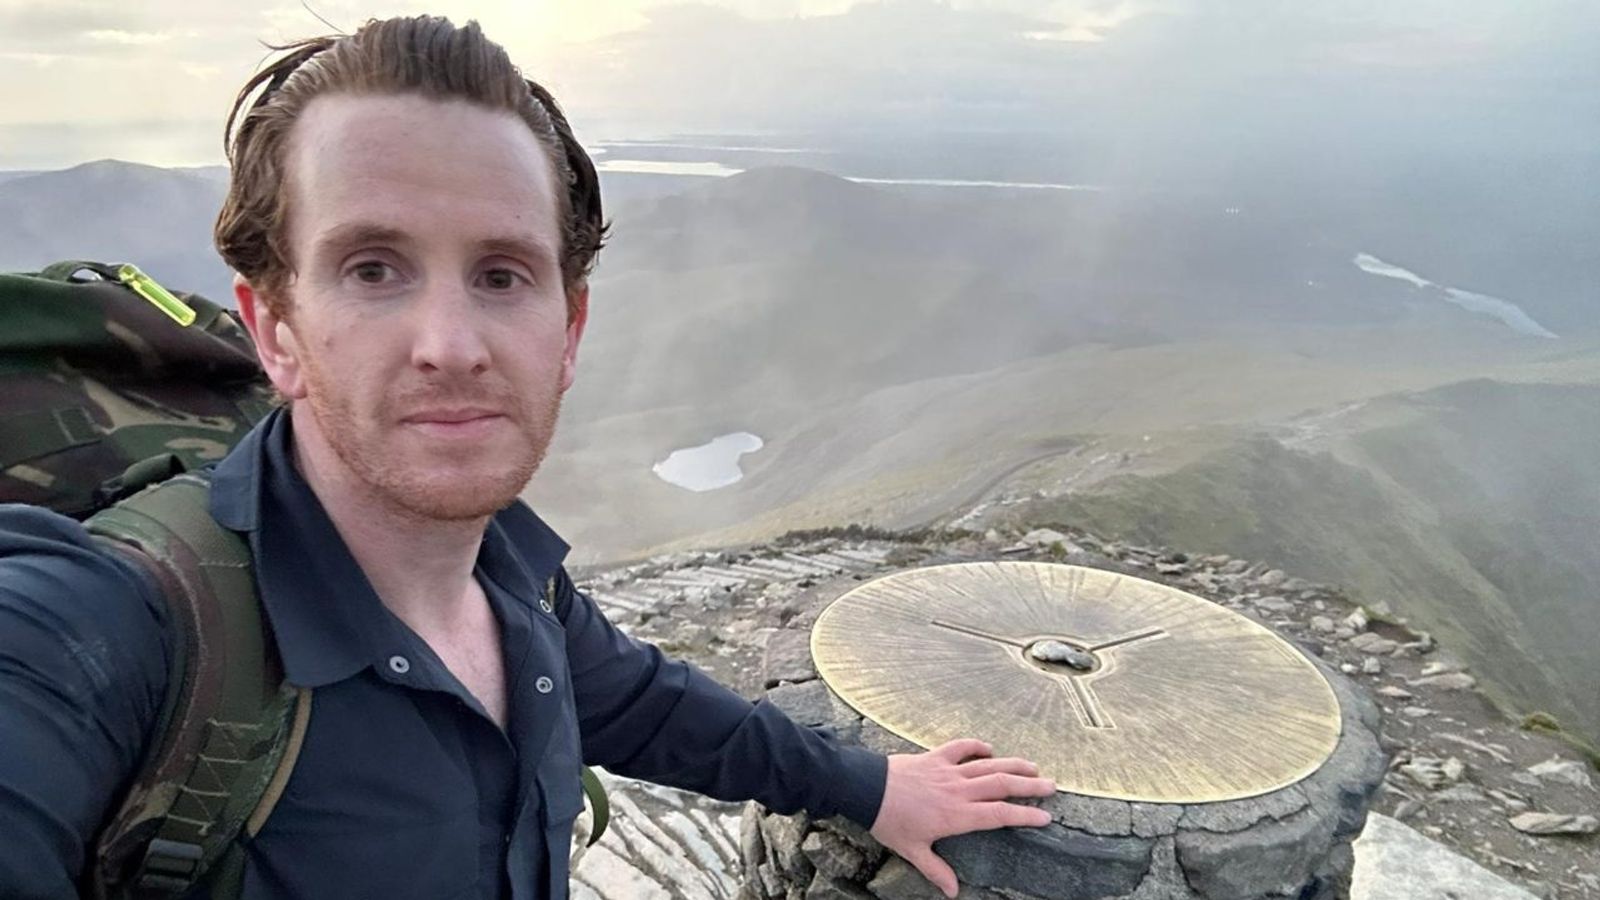 Firefighter sets new world record for most ascents of Wales's highest mountain in 48 hours - Sky News